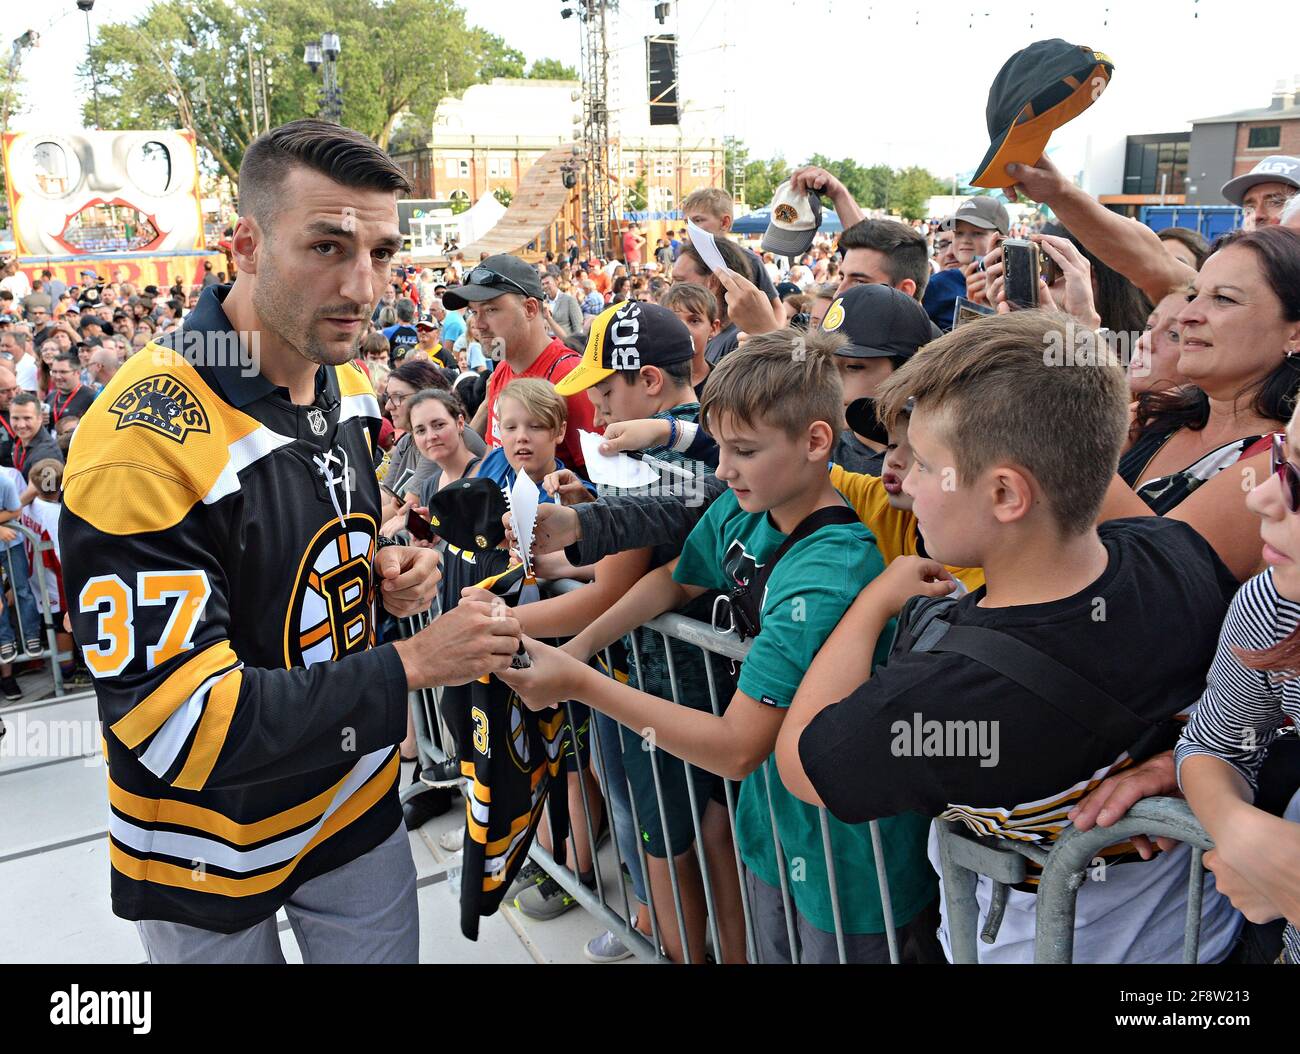 Patrice bergeron hi-res stock photography and images - Alamy